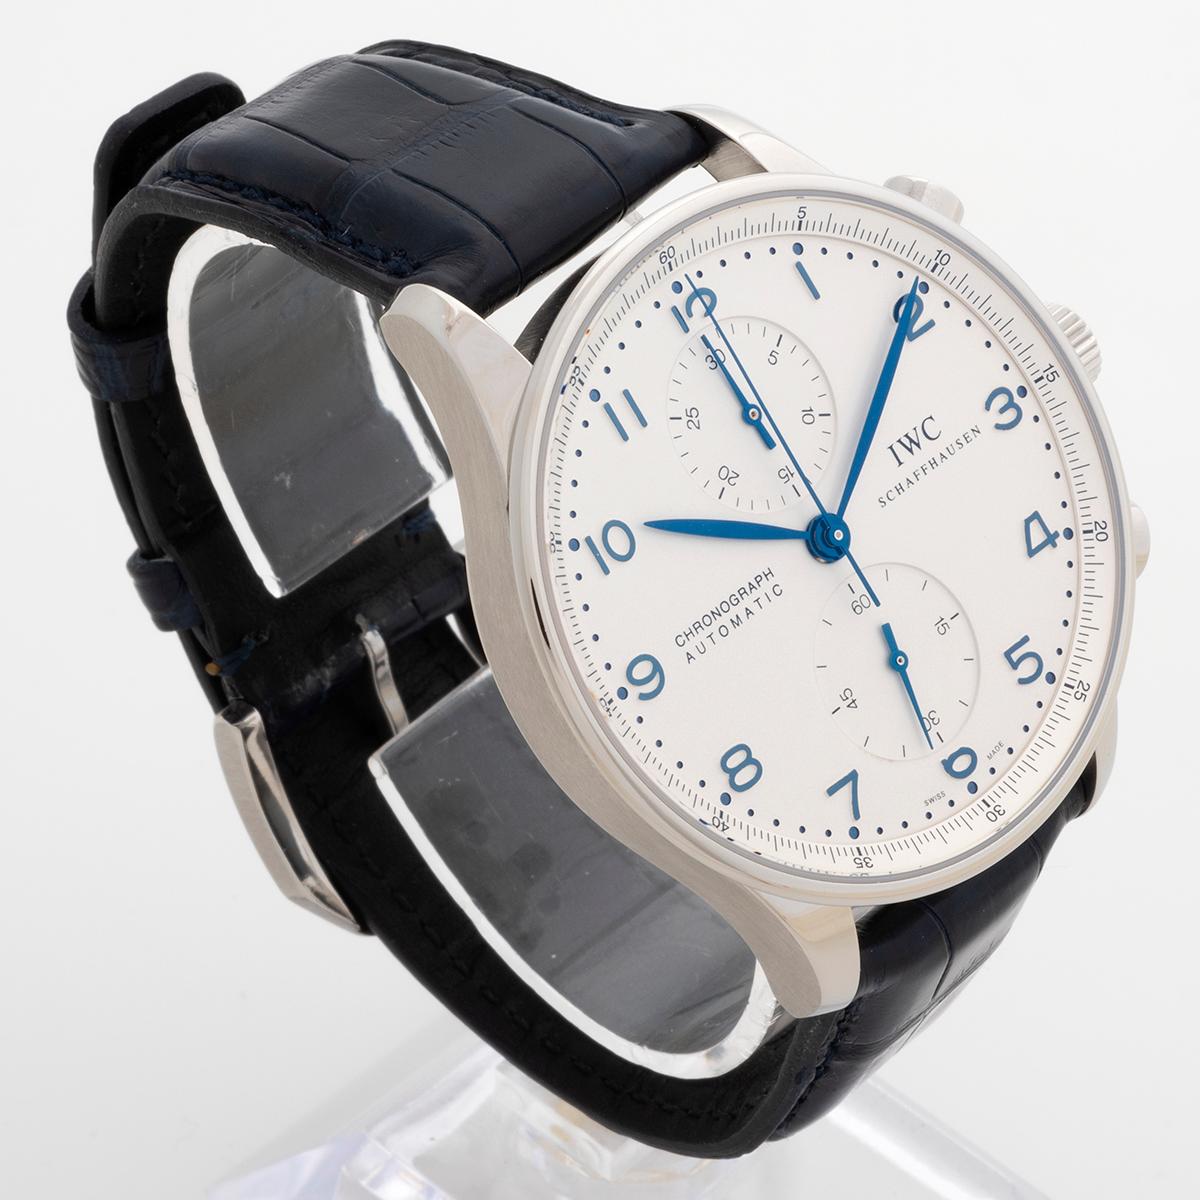 Our iconic IWC Portuguese Chronograph features a stainless steel 41mm case, with white dial and blue hands. This example is presented in outstanding condition and benefits from a full service at WIC in August 2022, the remainder of the 24 month